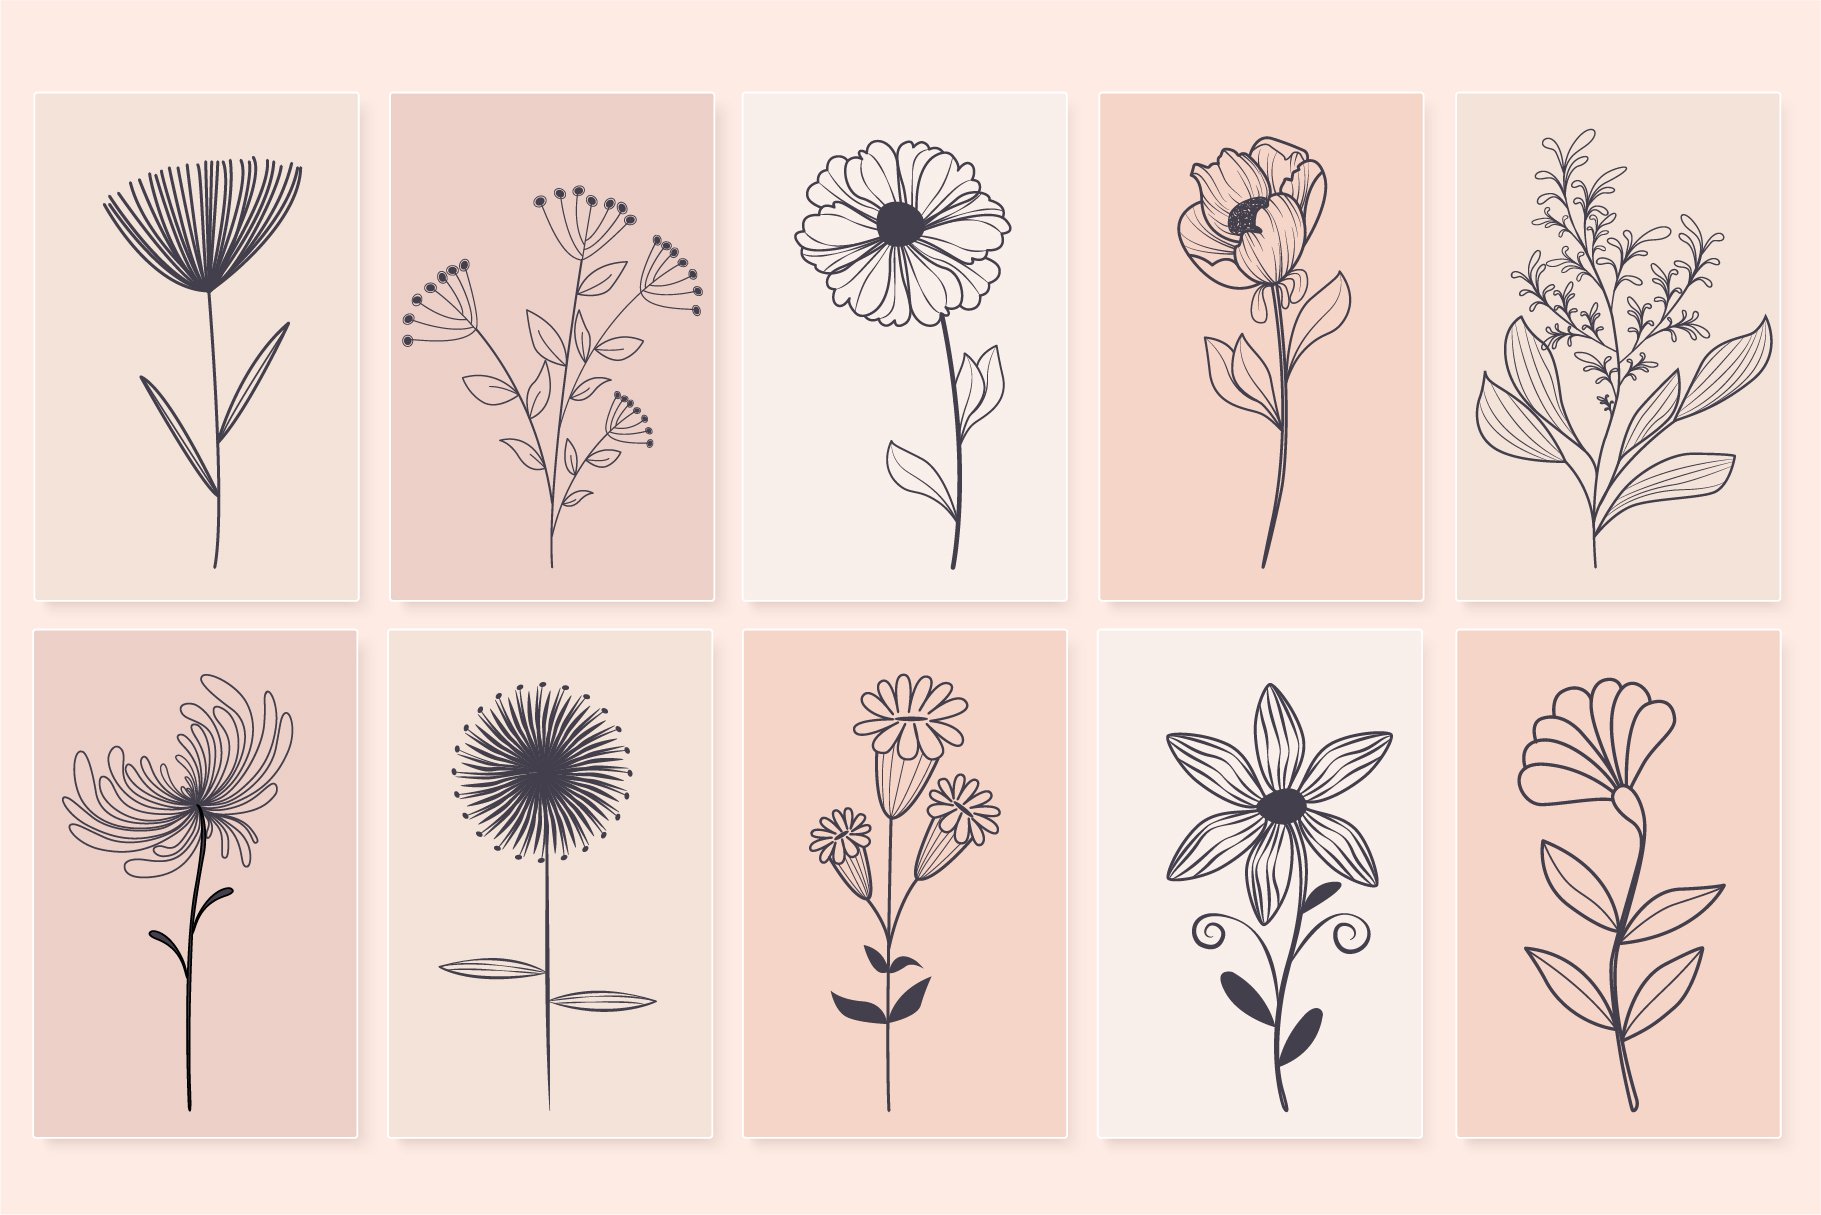 Some options of flowers in an outline style.